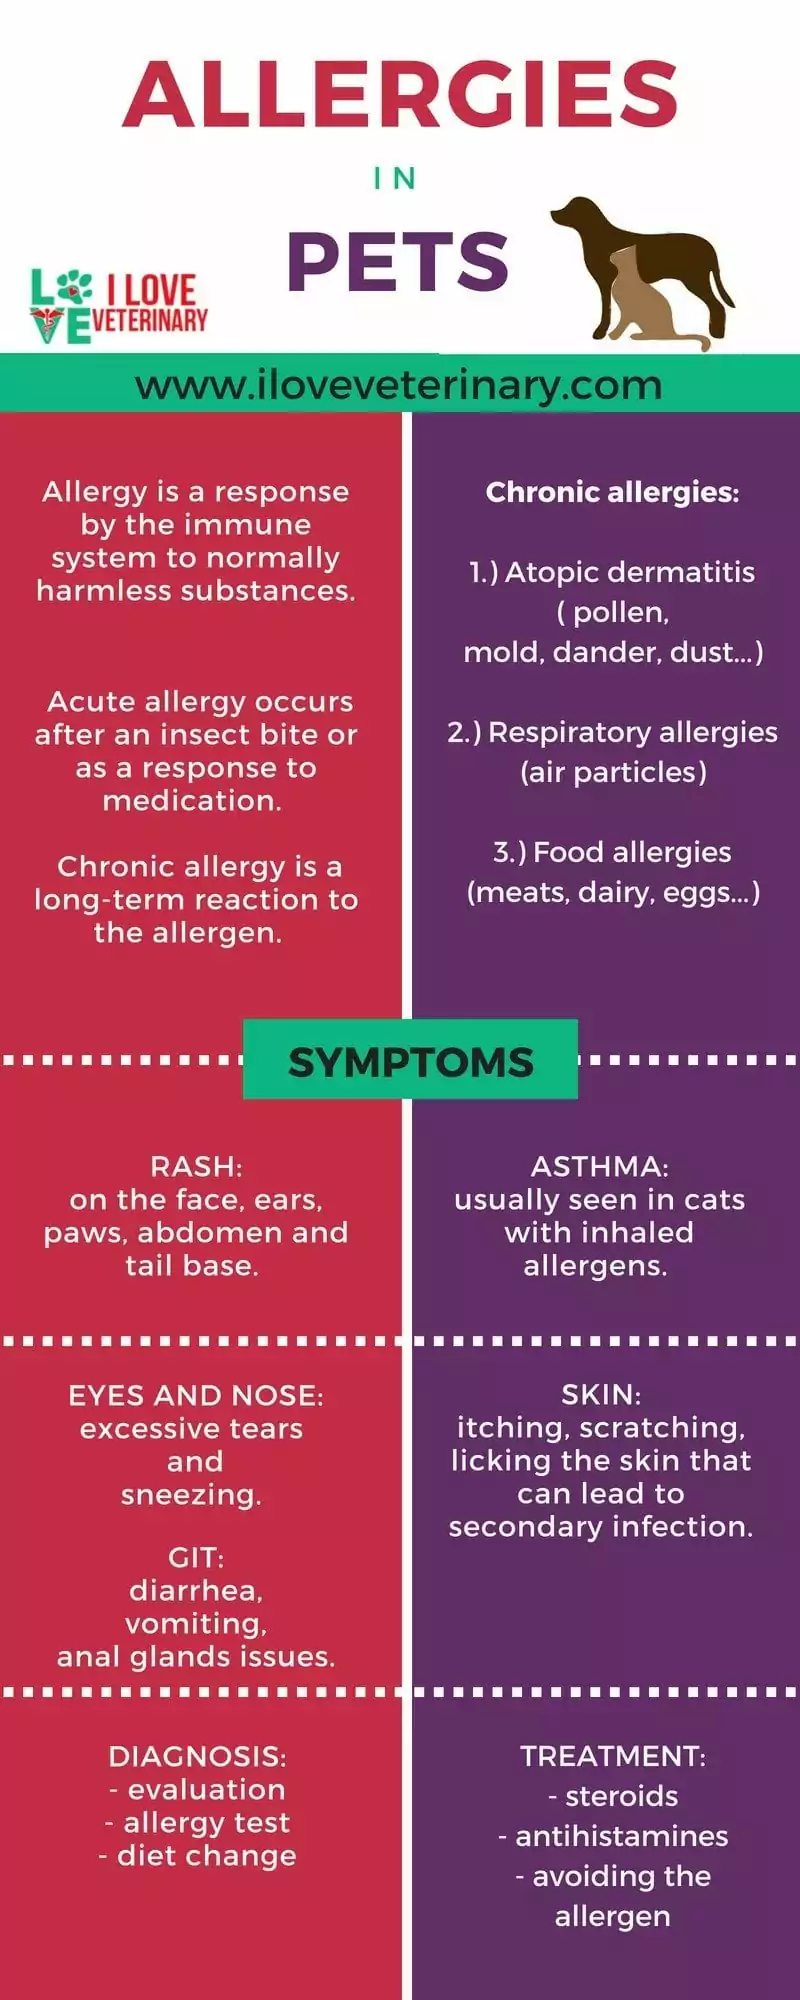 allergies in pets infographic 